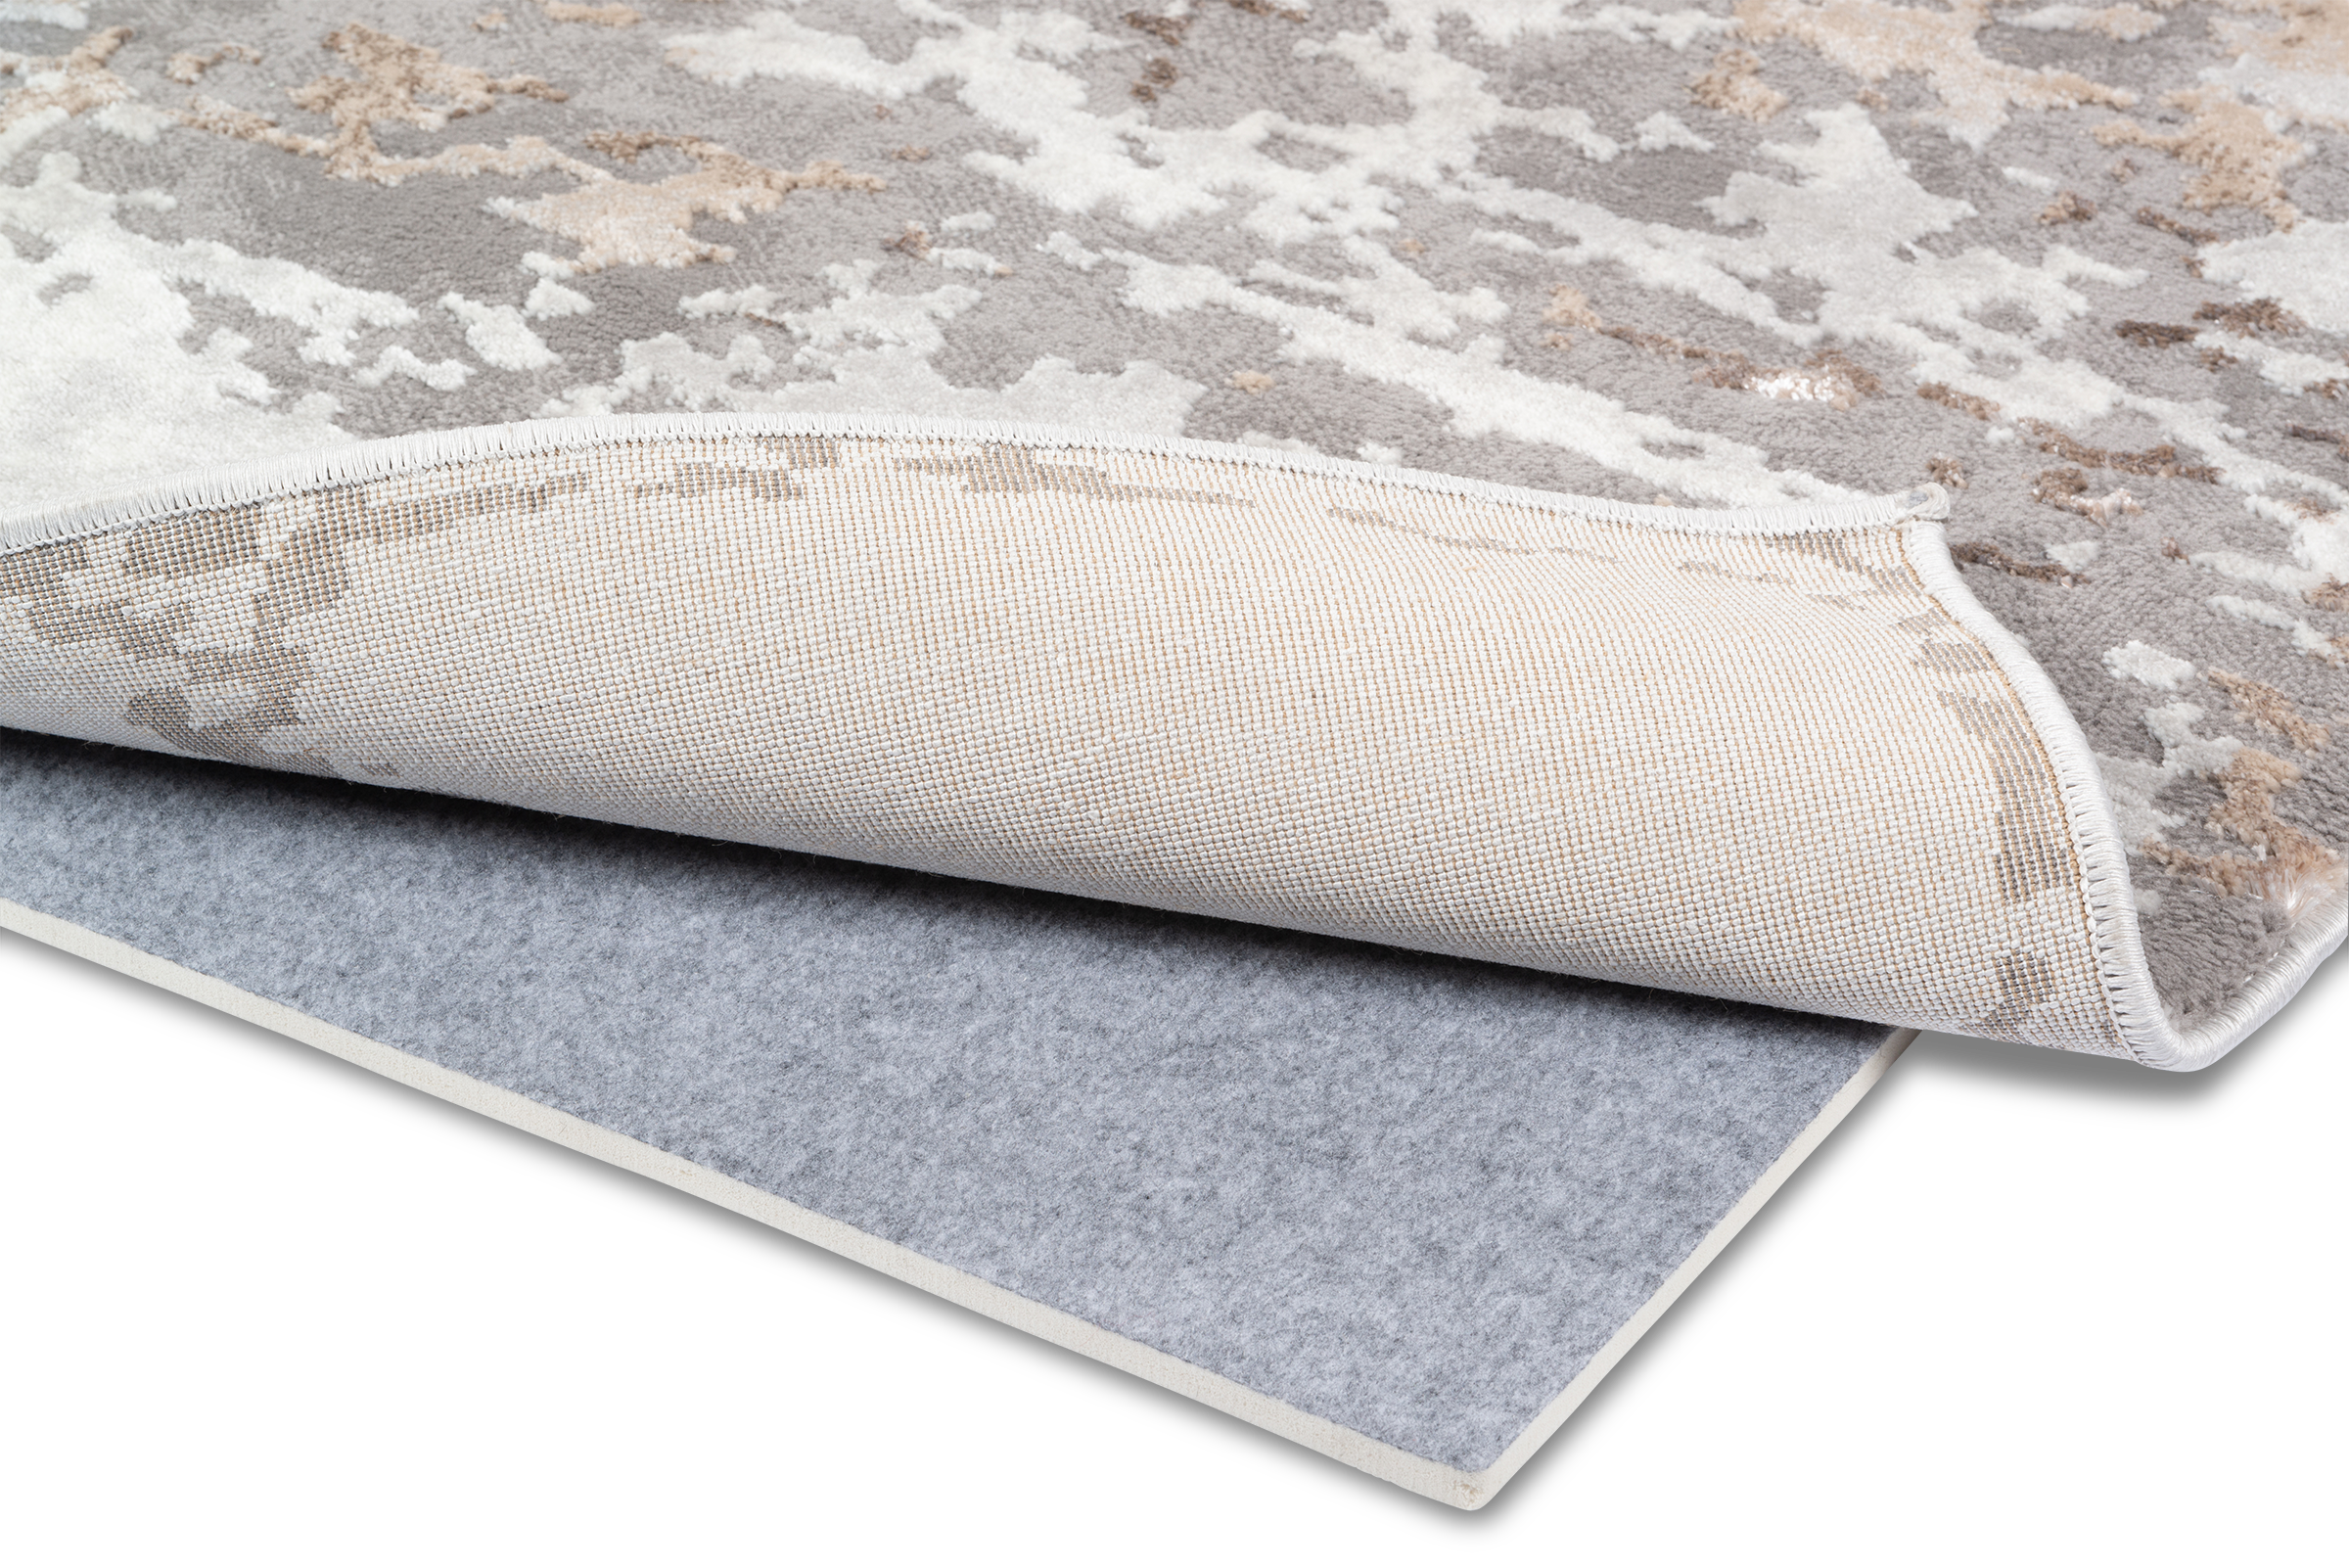 Premium Deluxe Cushioned Non-Slip Rug Pad 3 x 5 ft by Slip-Stop, Gray